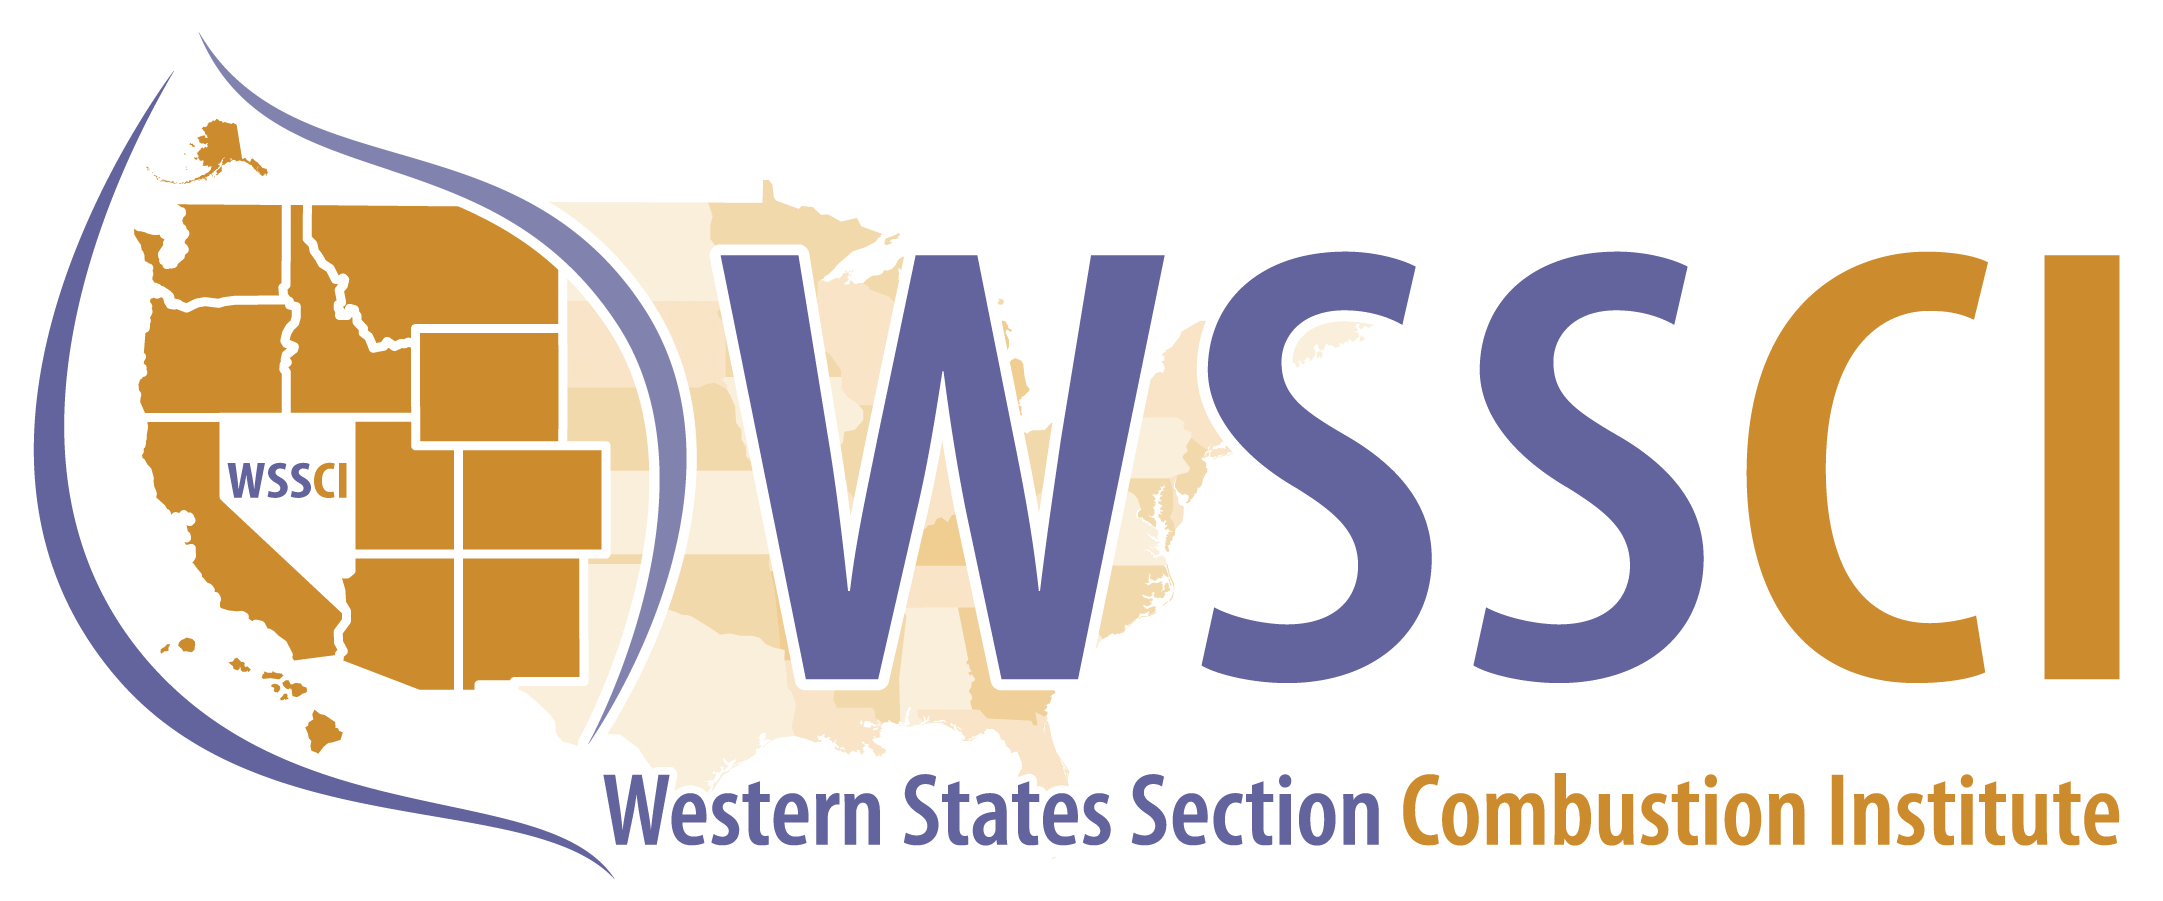 WSSCI – Western States Section of the Combustion Institute